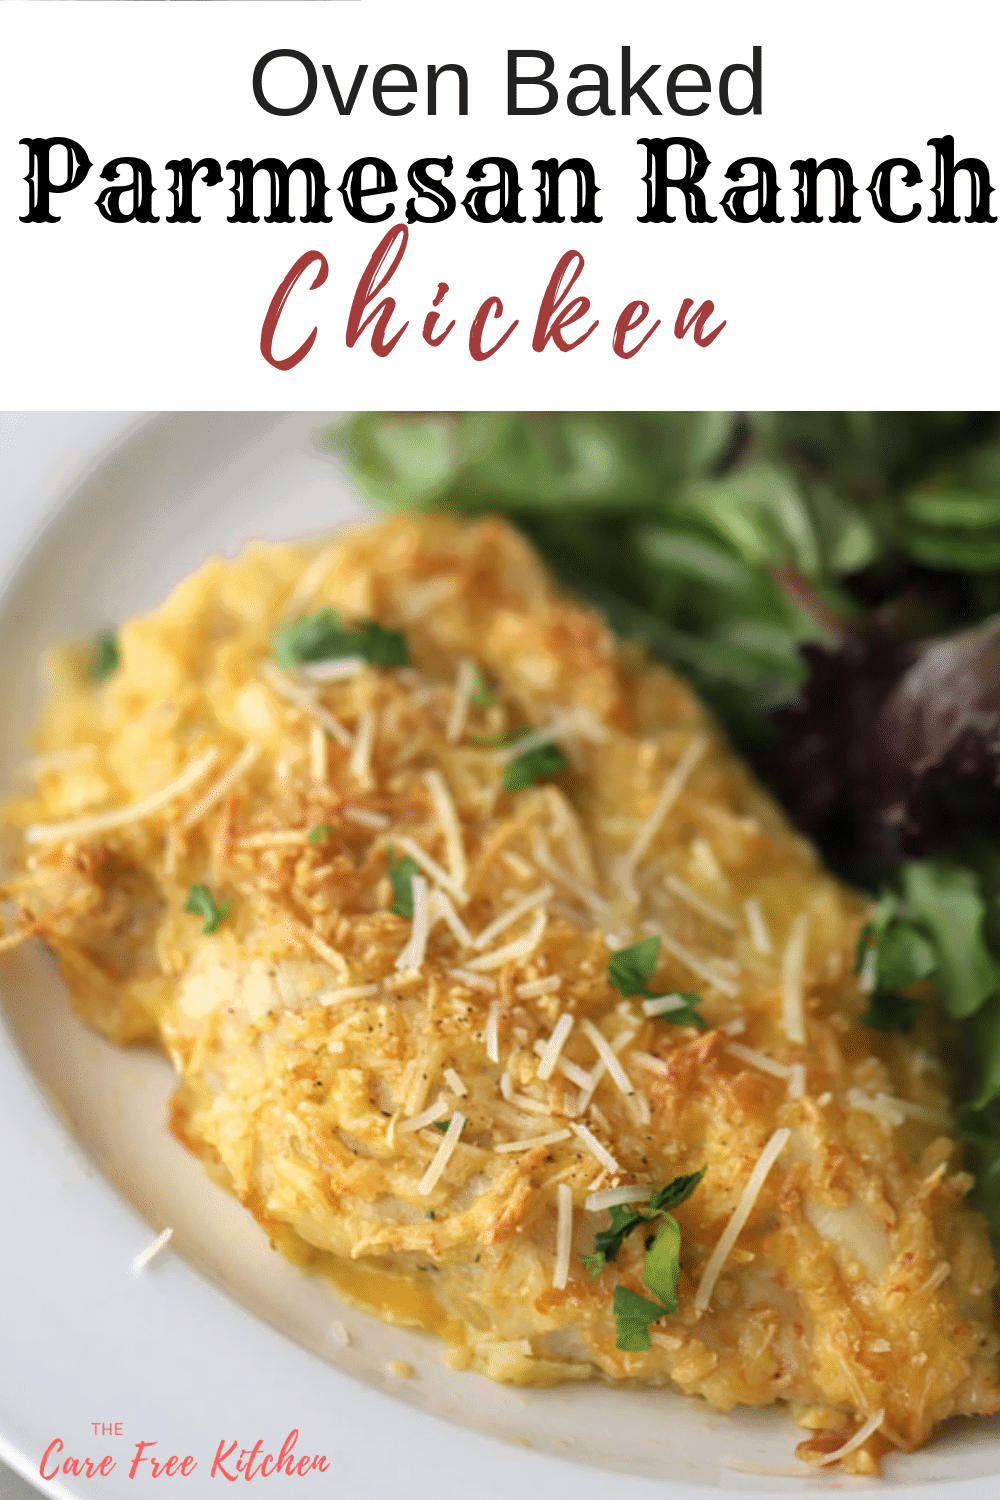 Pinterest pin for Parmesan Ranch Chicken.